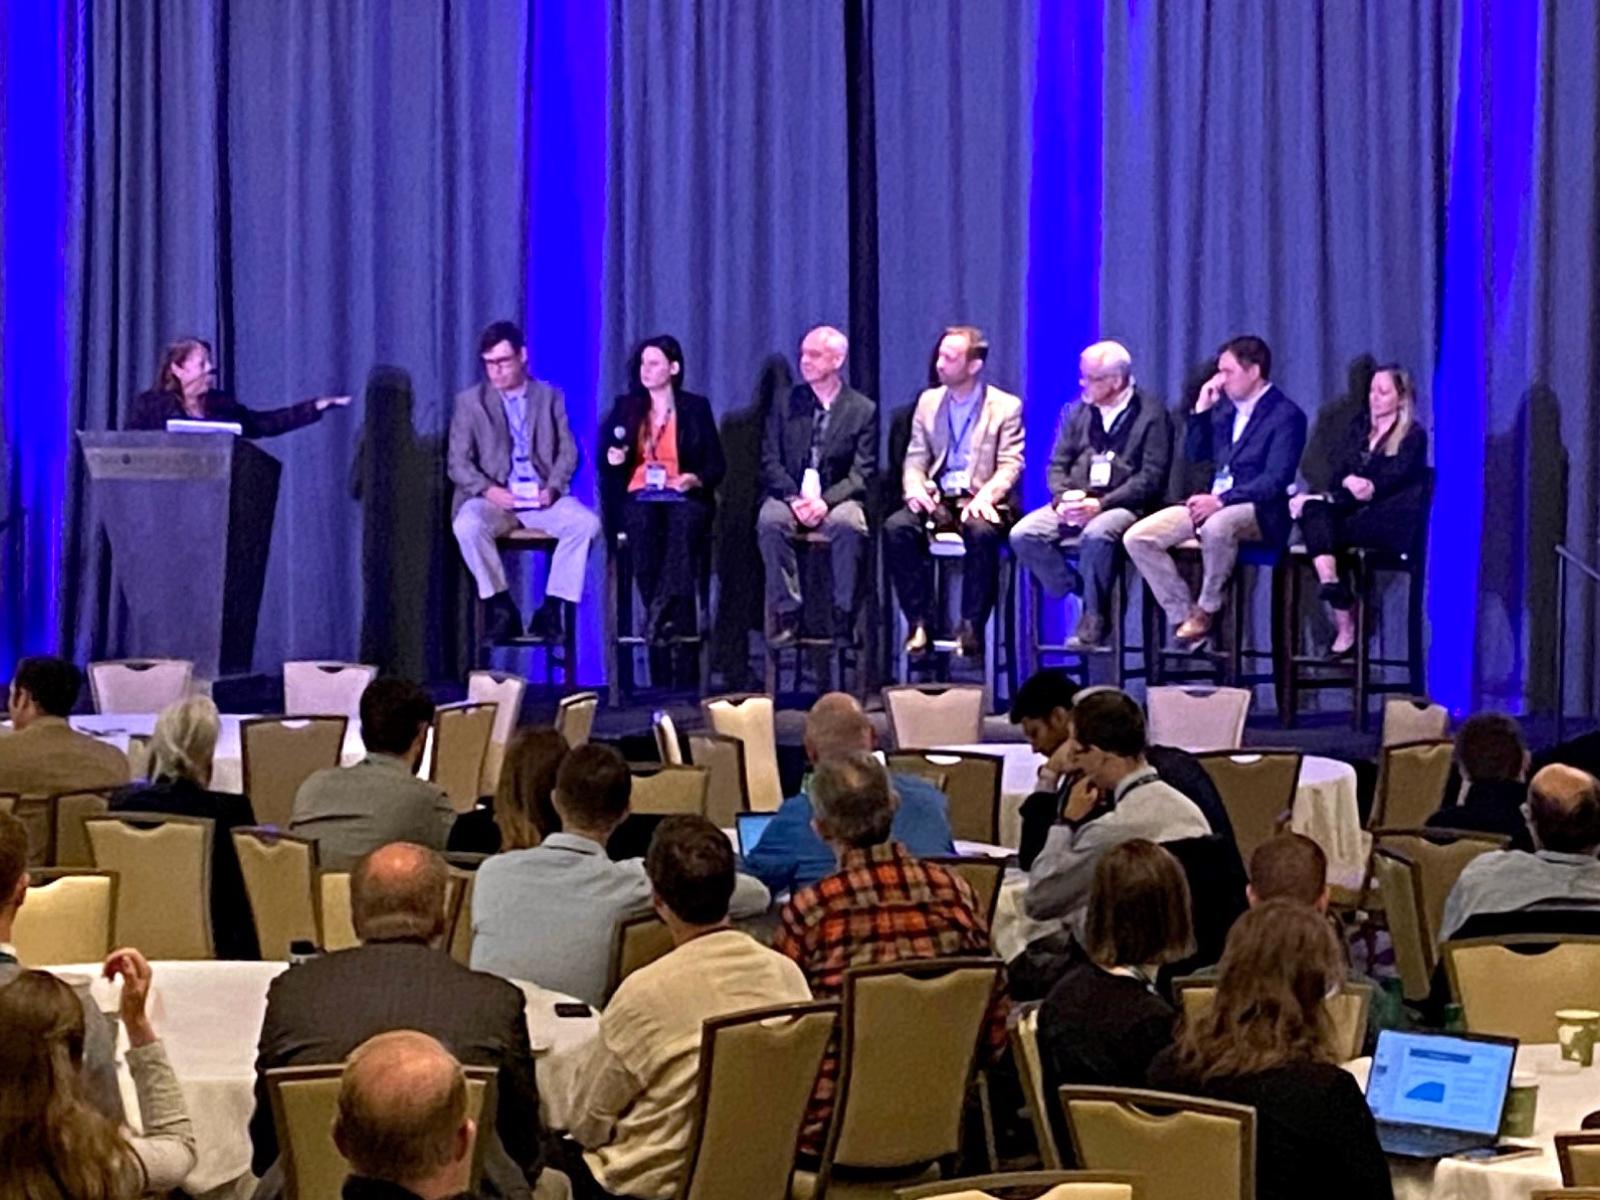 Seven speakers and a moderator on a stage at a conference.